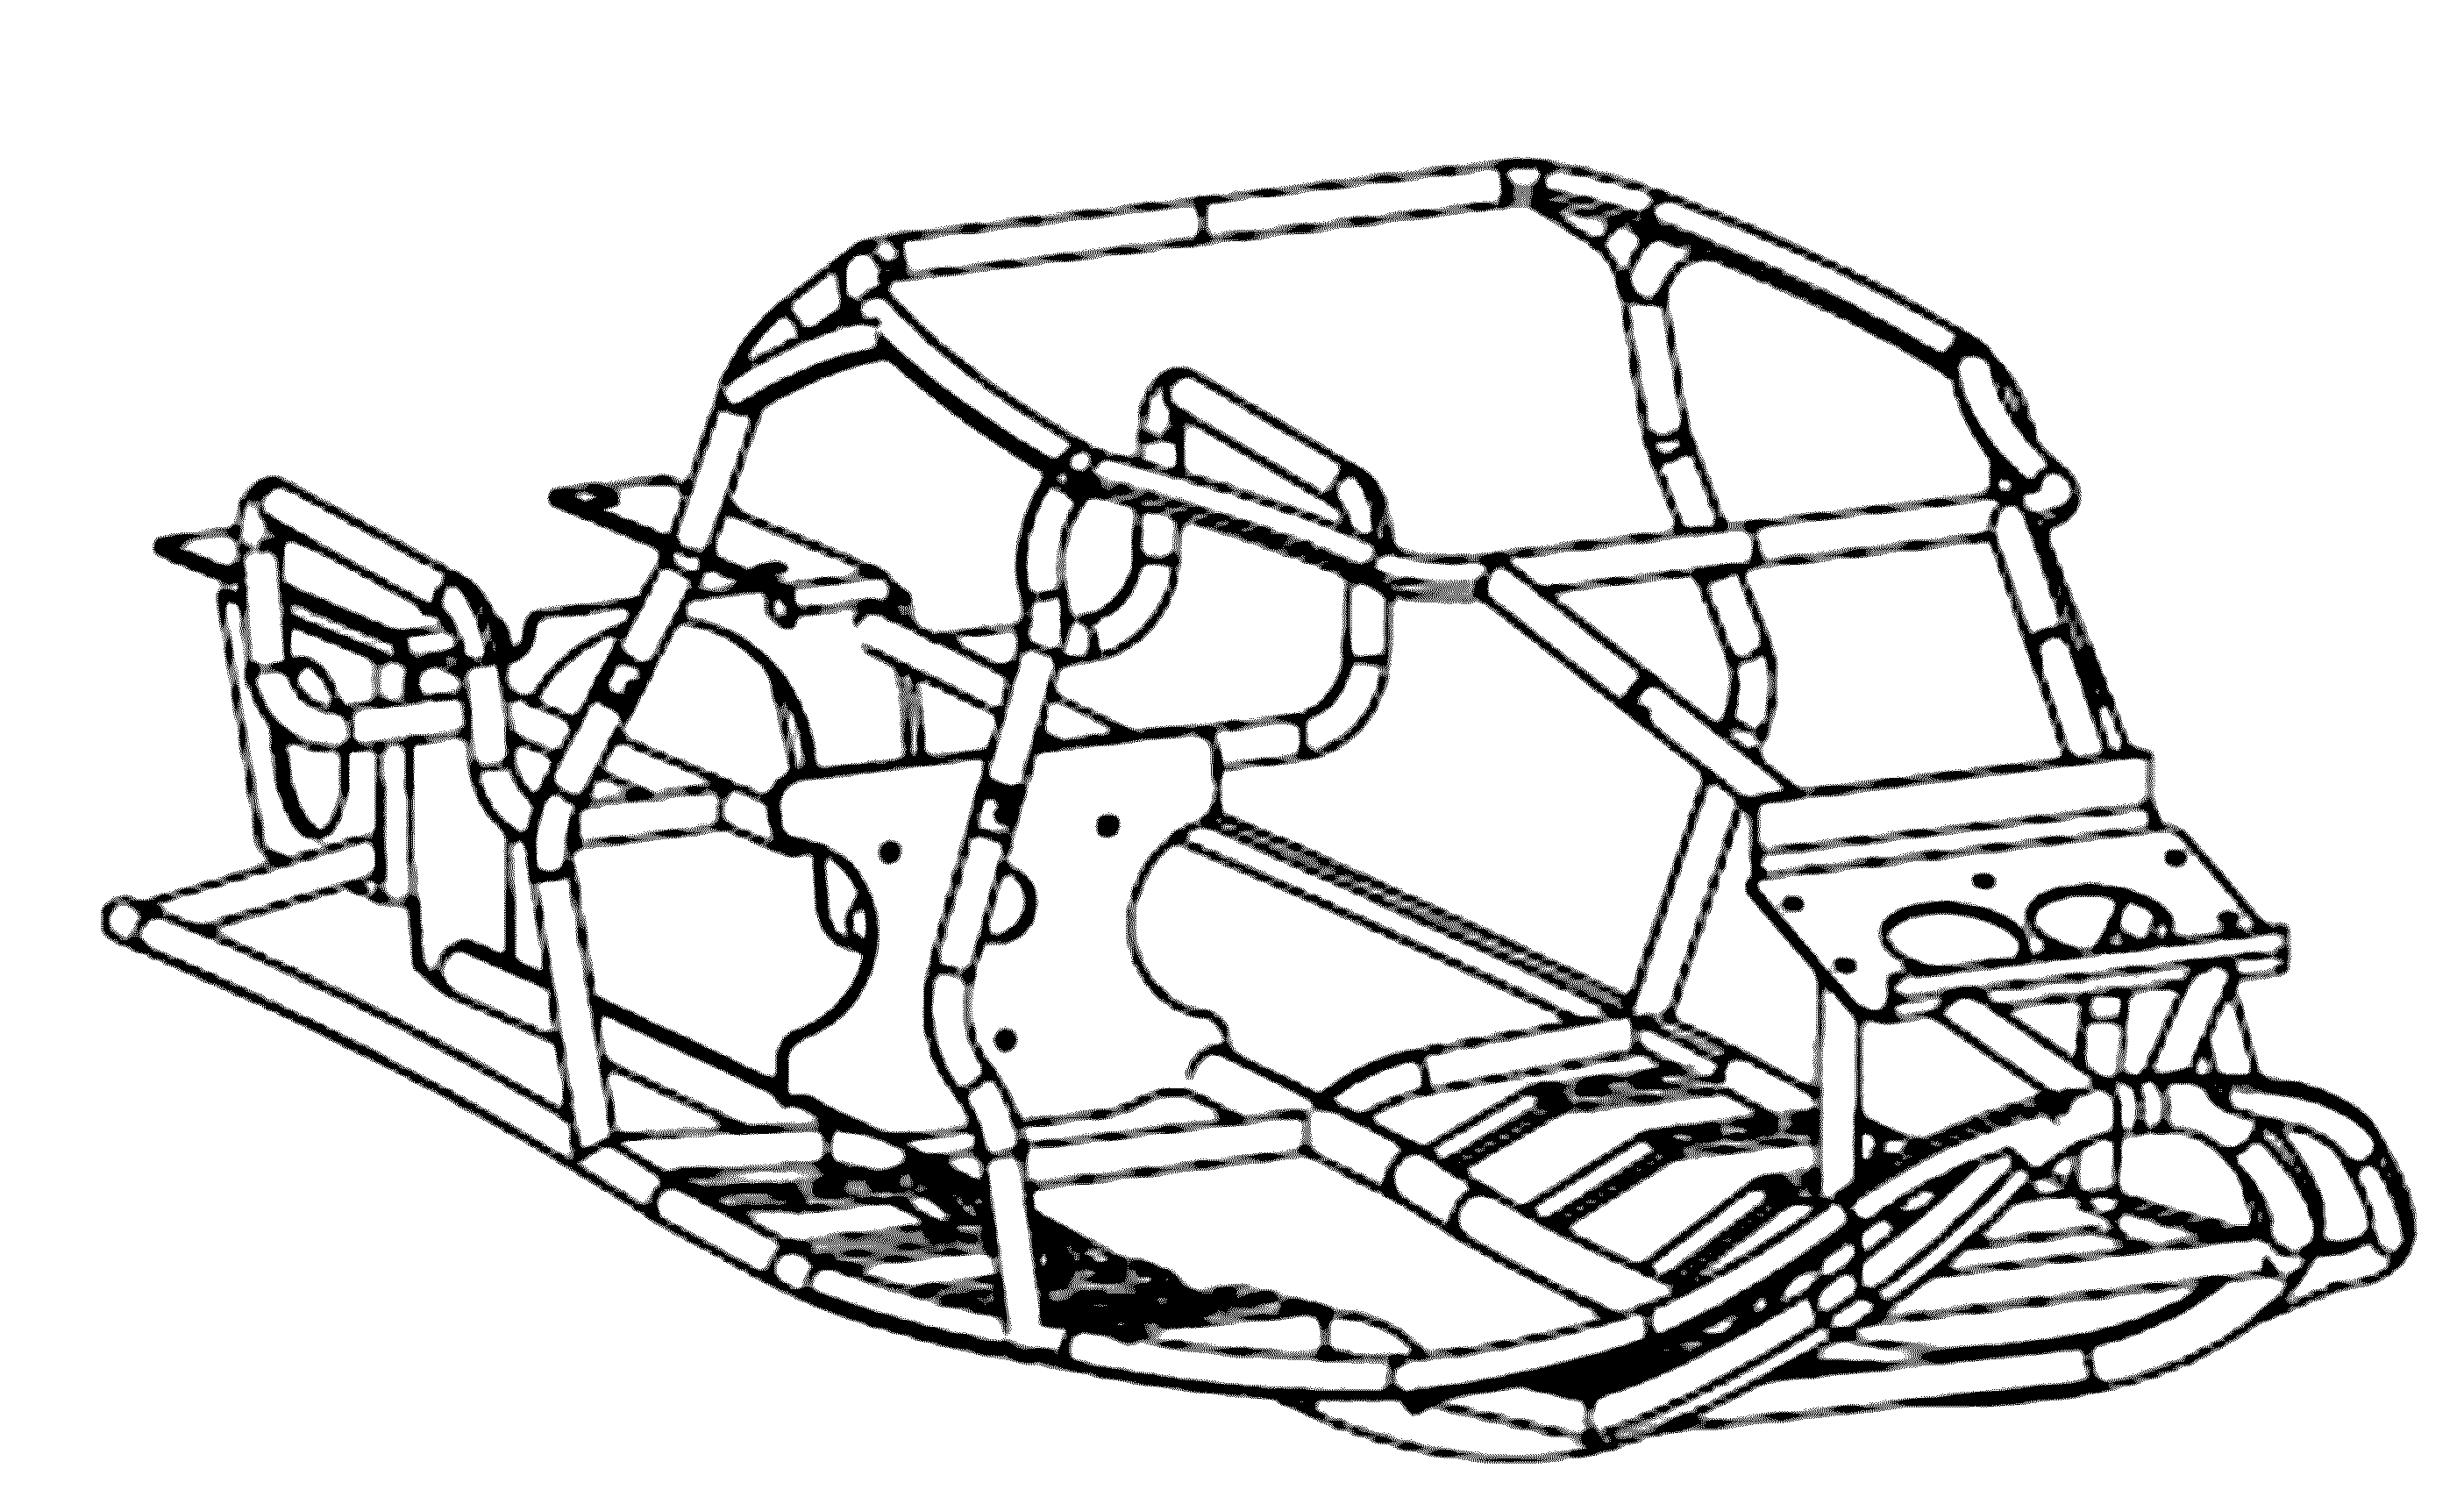 Personal watercraft chassis